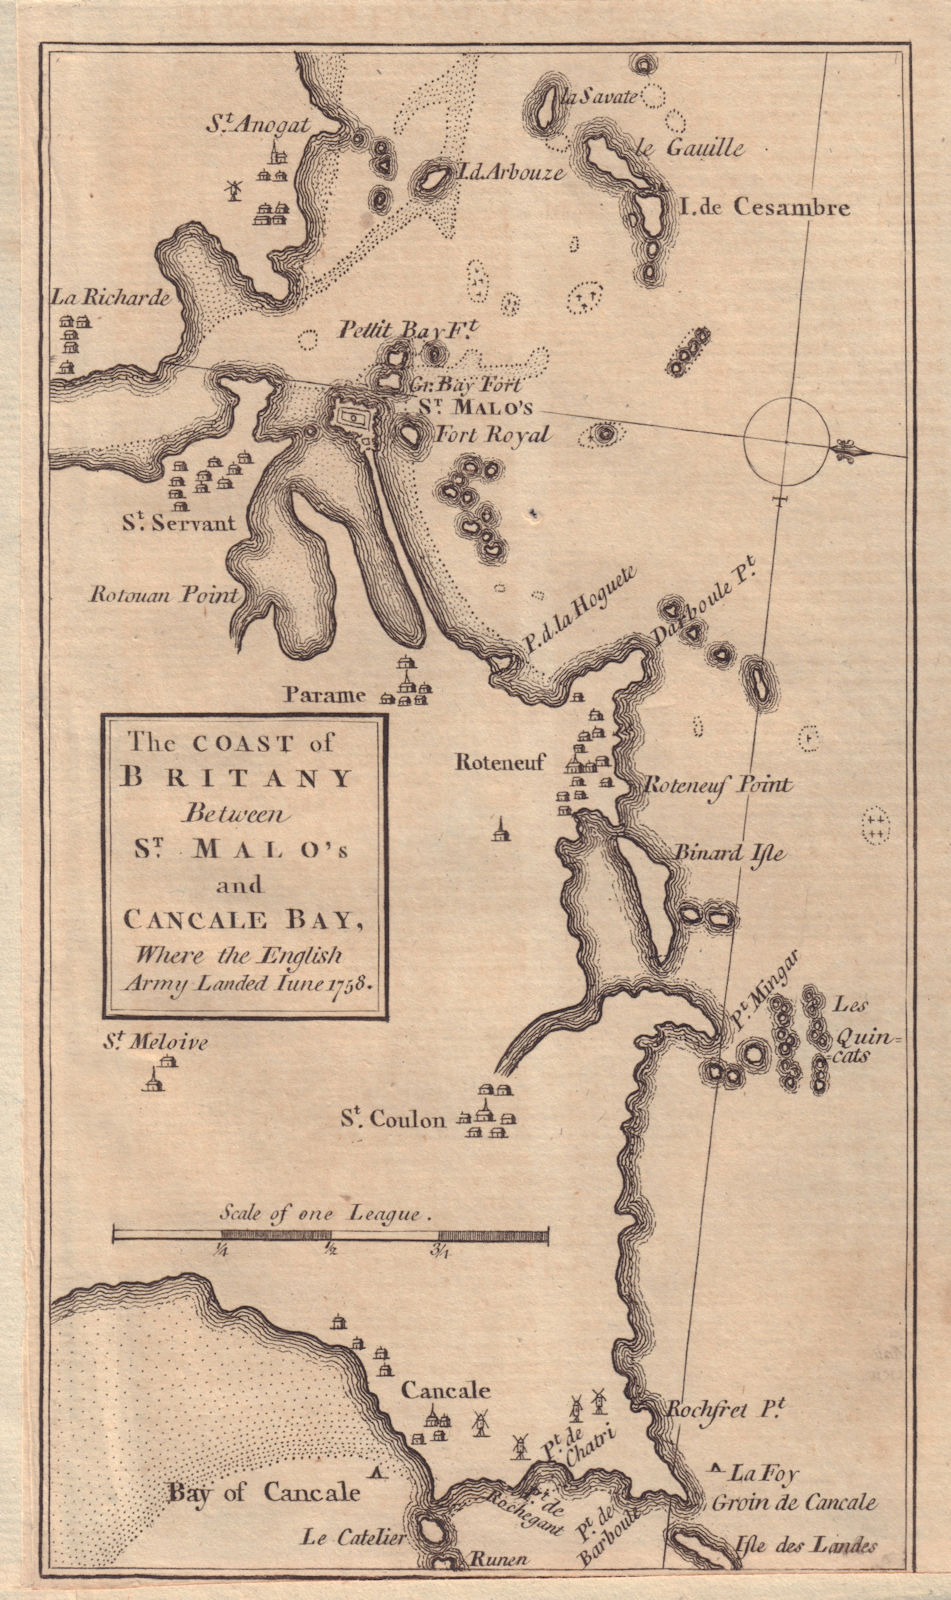 The Coast of Britany between St. Malo's & Cancale Bay. Dinard GENTS MAG 1758 map